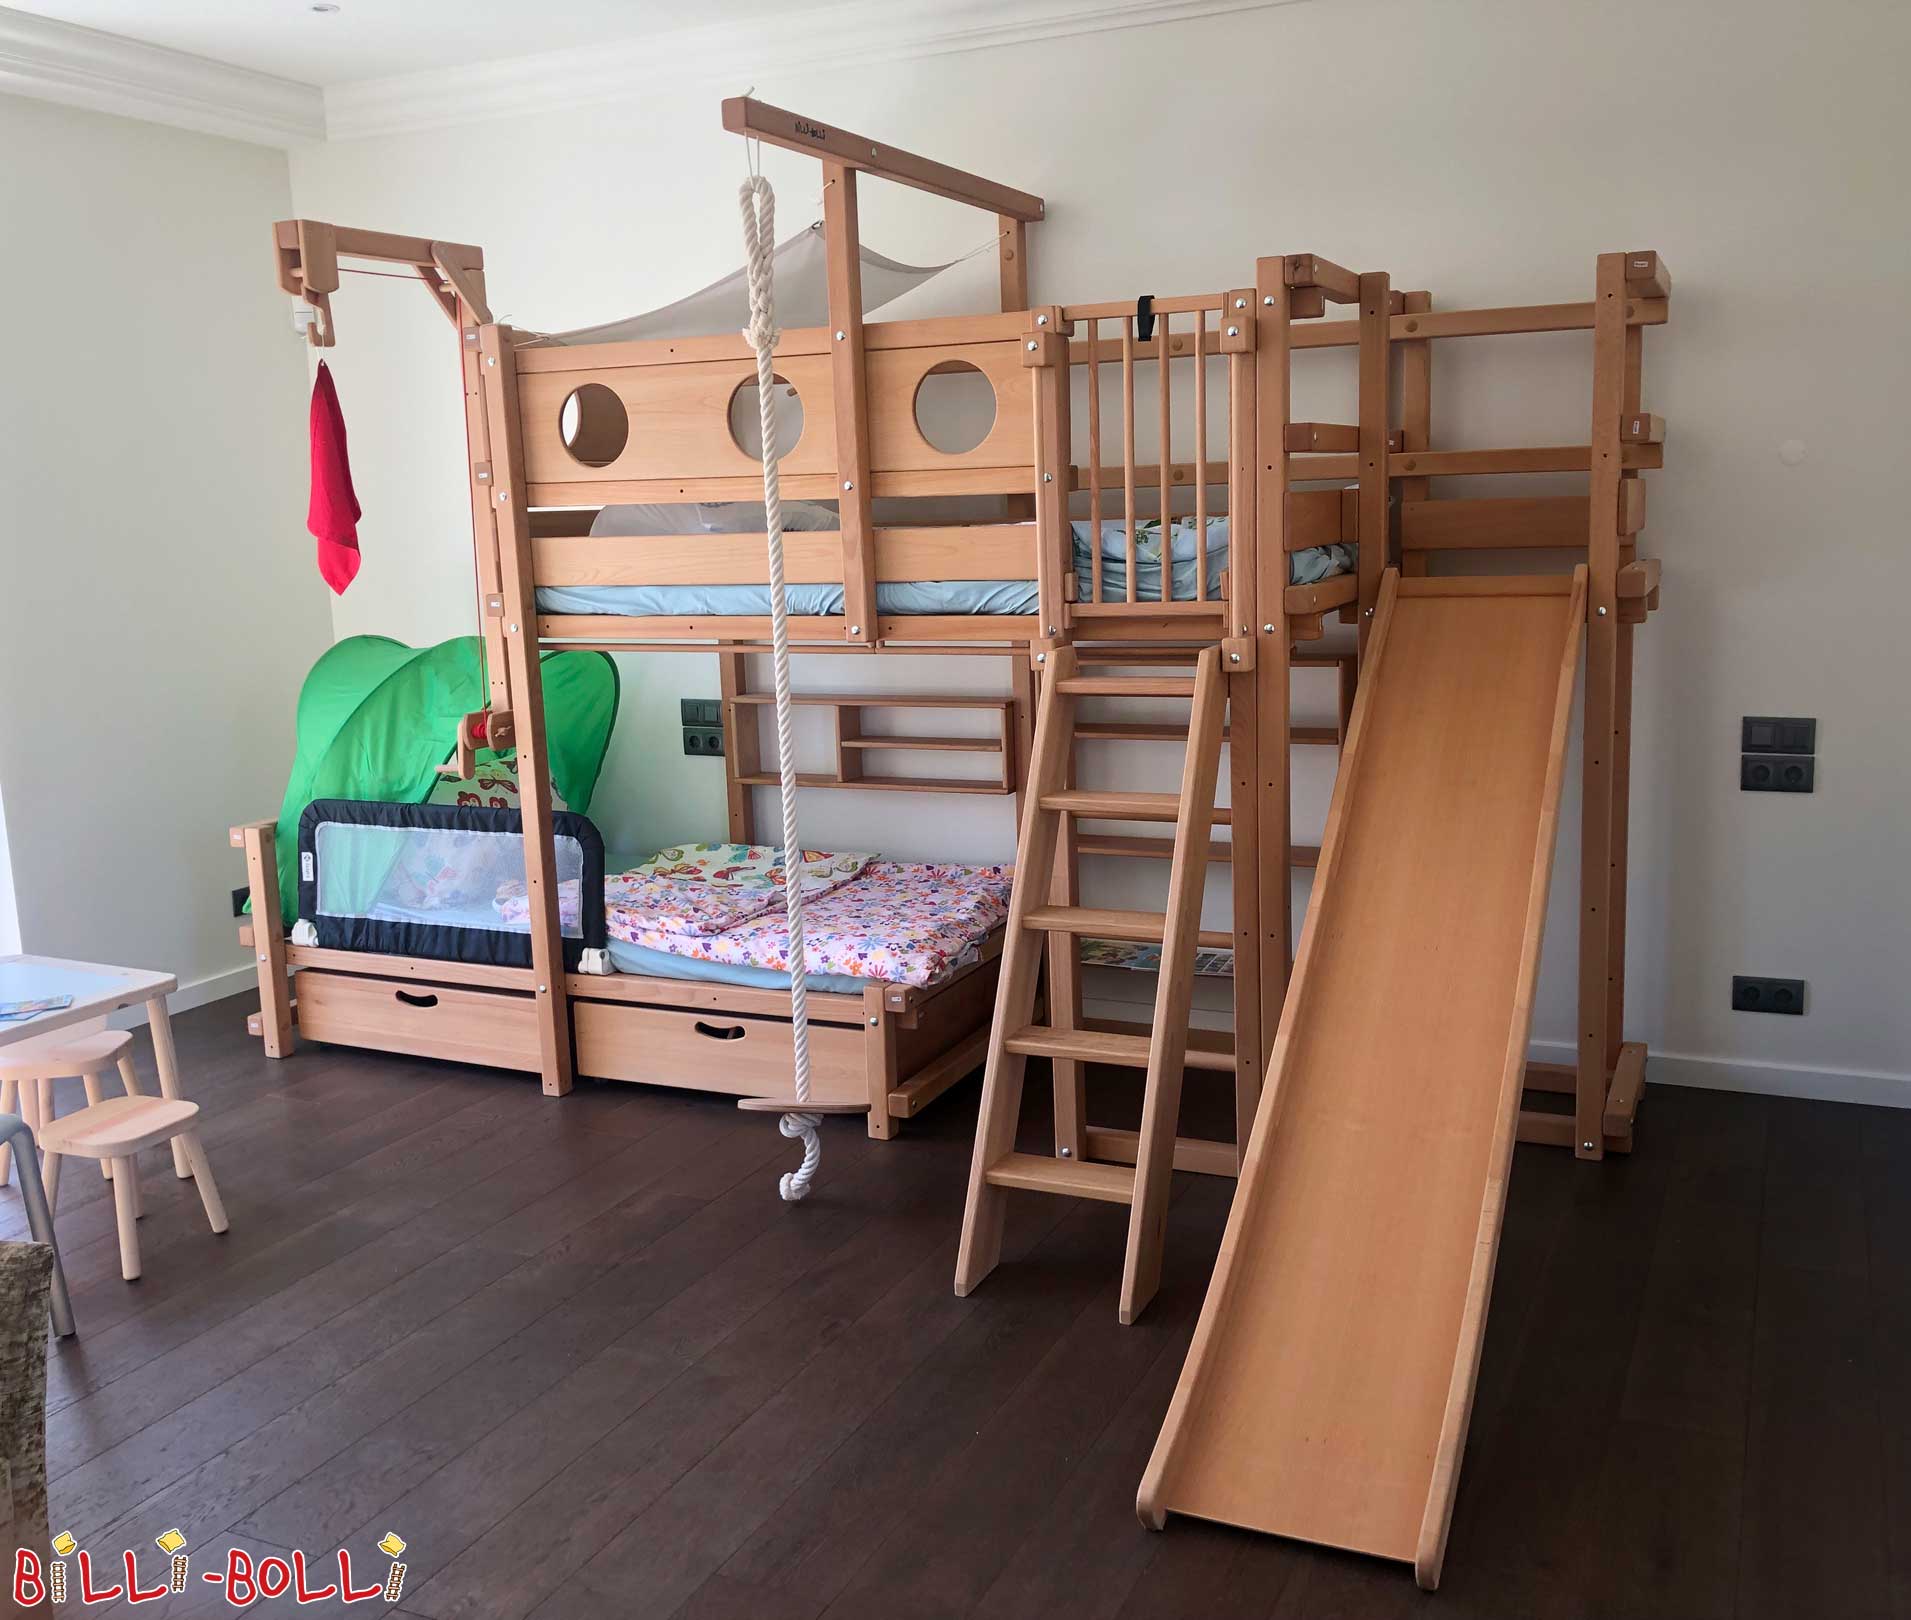 Laterally staggered bunk bed for 2 kids